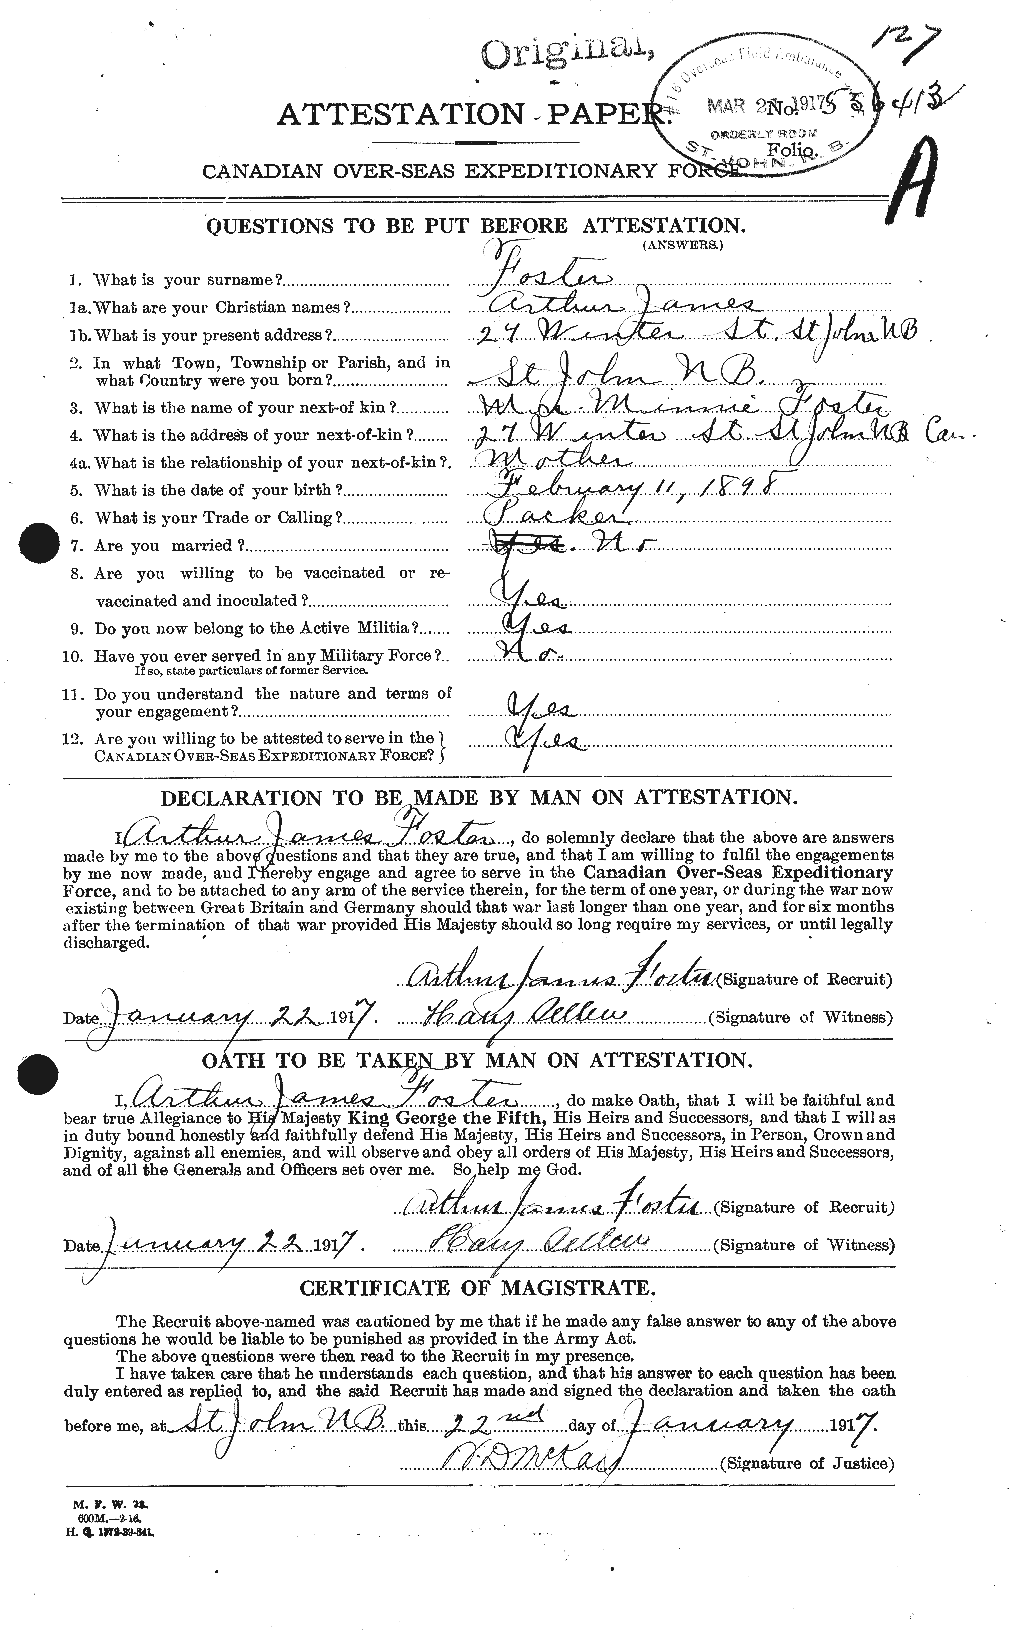 Personnel Records of the First World War - CEF 330474a